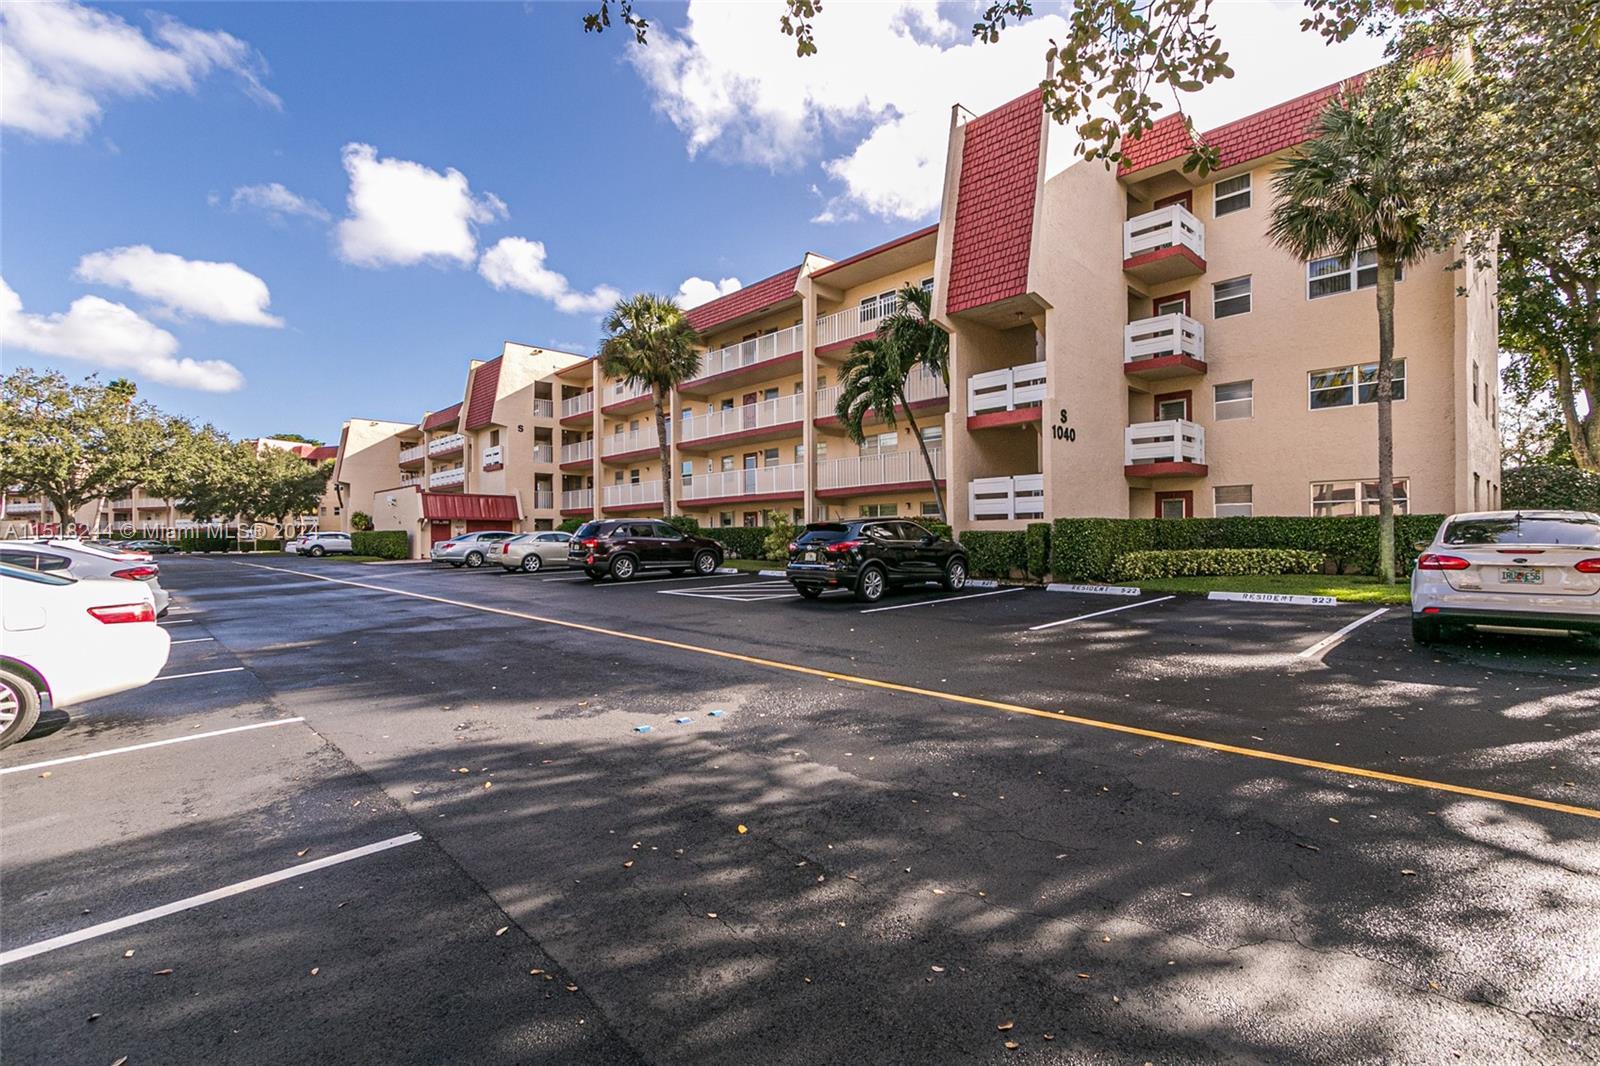 Photo of 1040 Country Club Dr #209 in Margate, FL